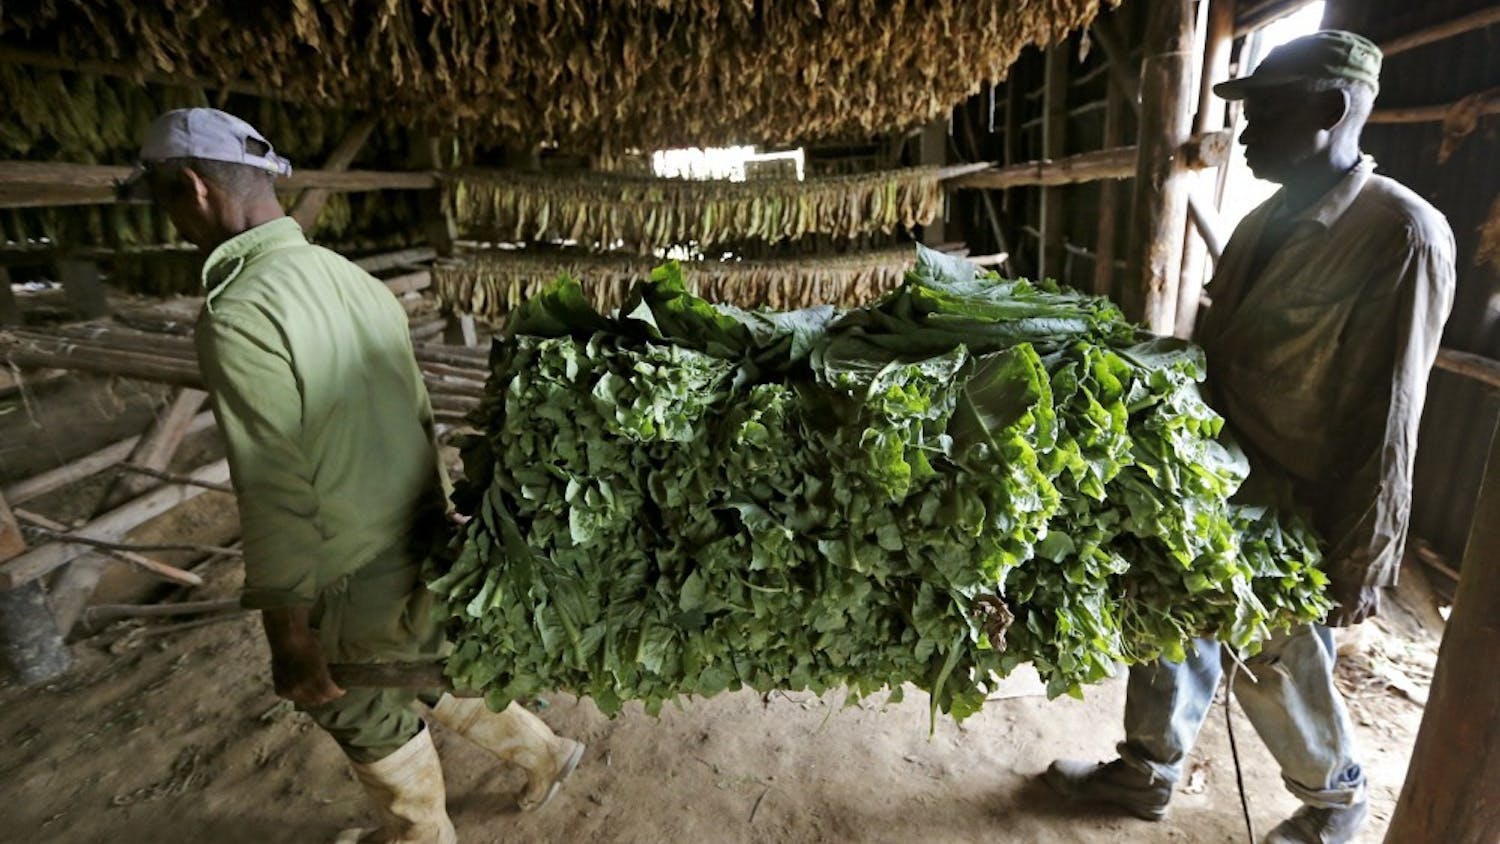 Jesus Gerald Perez, 47, left, and Alfonso Sanchez Lopez, 63, carry a load of tobacco leaves to be dried at Finca Ramirez, a tobacco farm in Puerta del Golpe, Cuba, on March 24, 2016. (Al Diaz/Miami Herald/TNS)